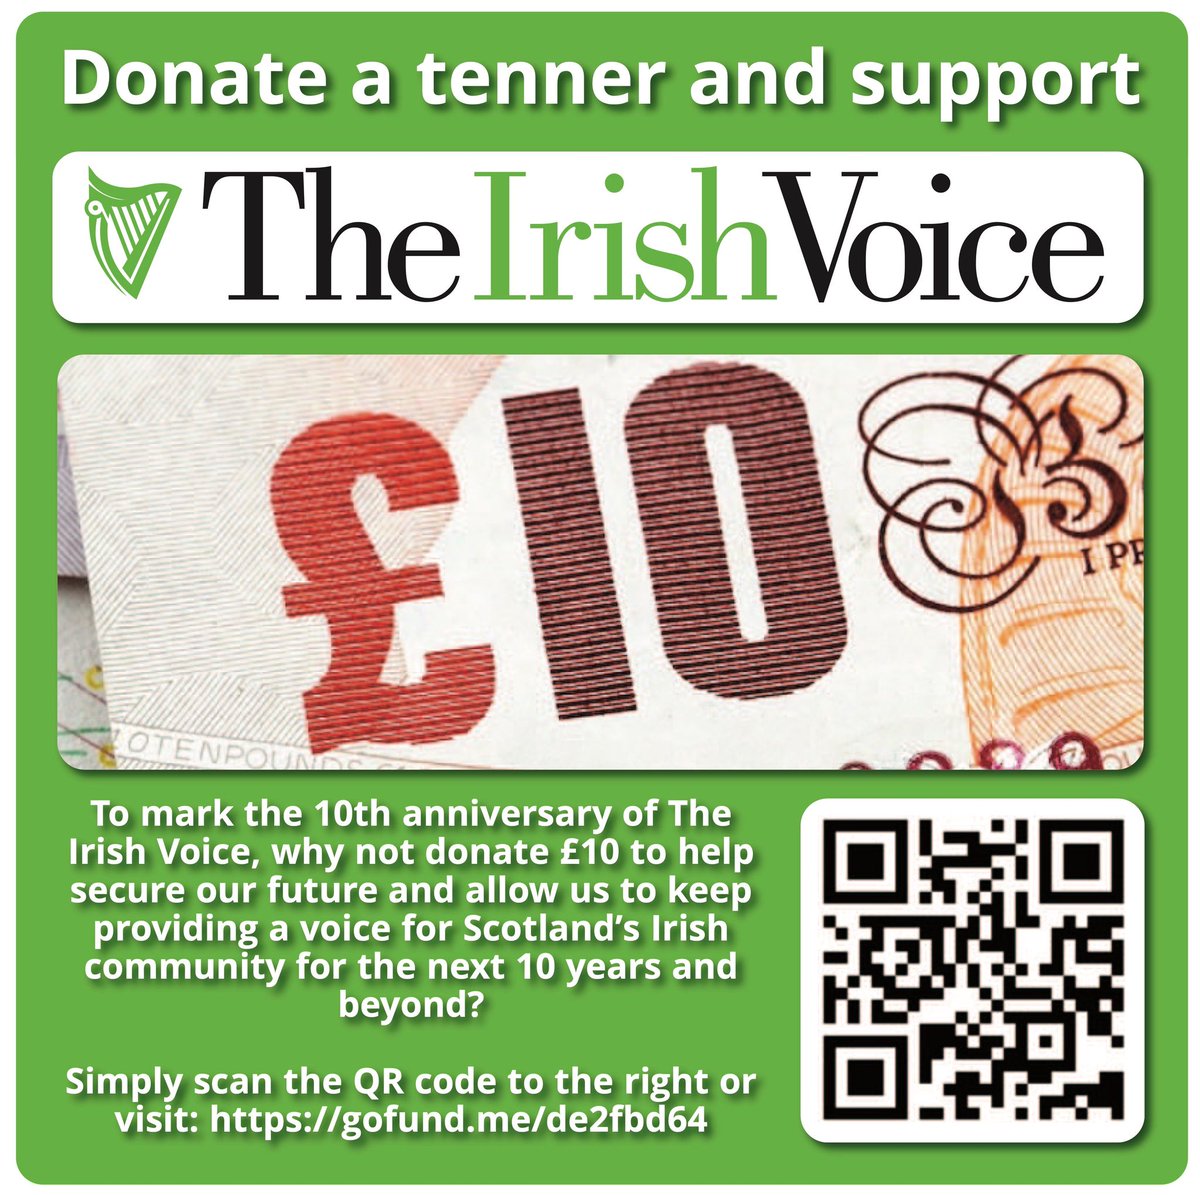 Thank you to everyone who has donated to us thus far! If you would like to support The Irish Voice in our 10th anniversary year, why not donate £10 to help secure our future? If you would like to make a donation, regardless of the amount simply visit: gofund.me/de2fbd64